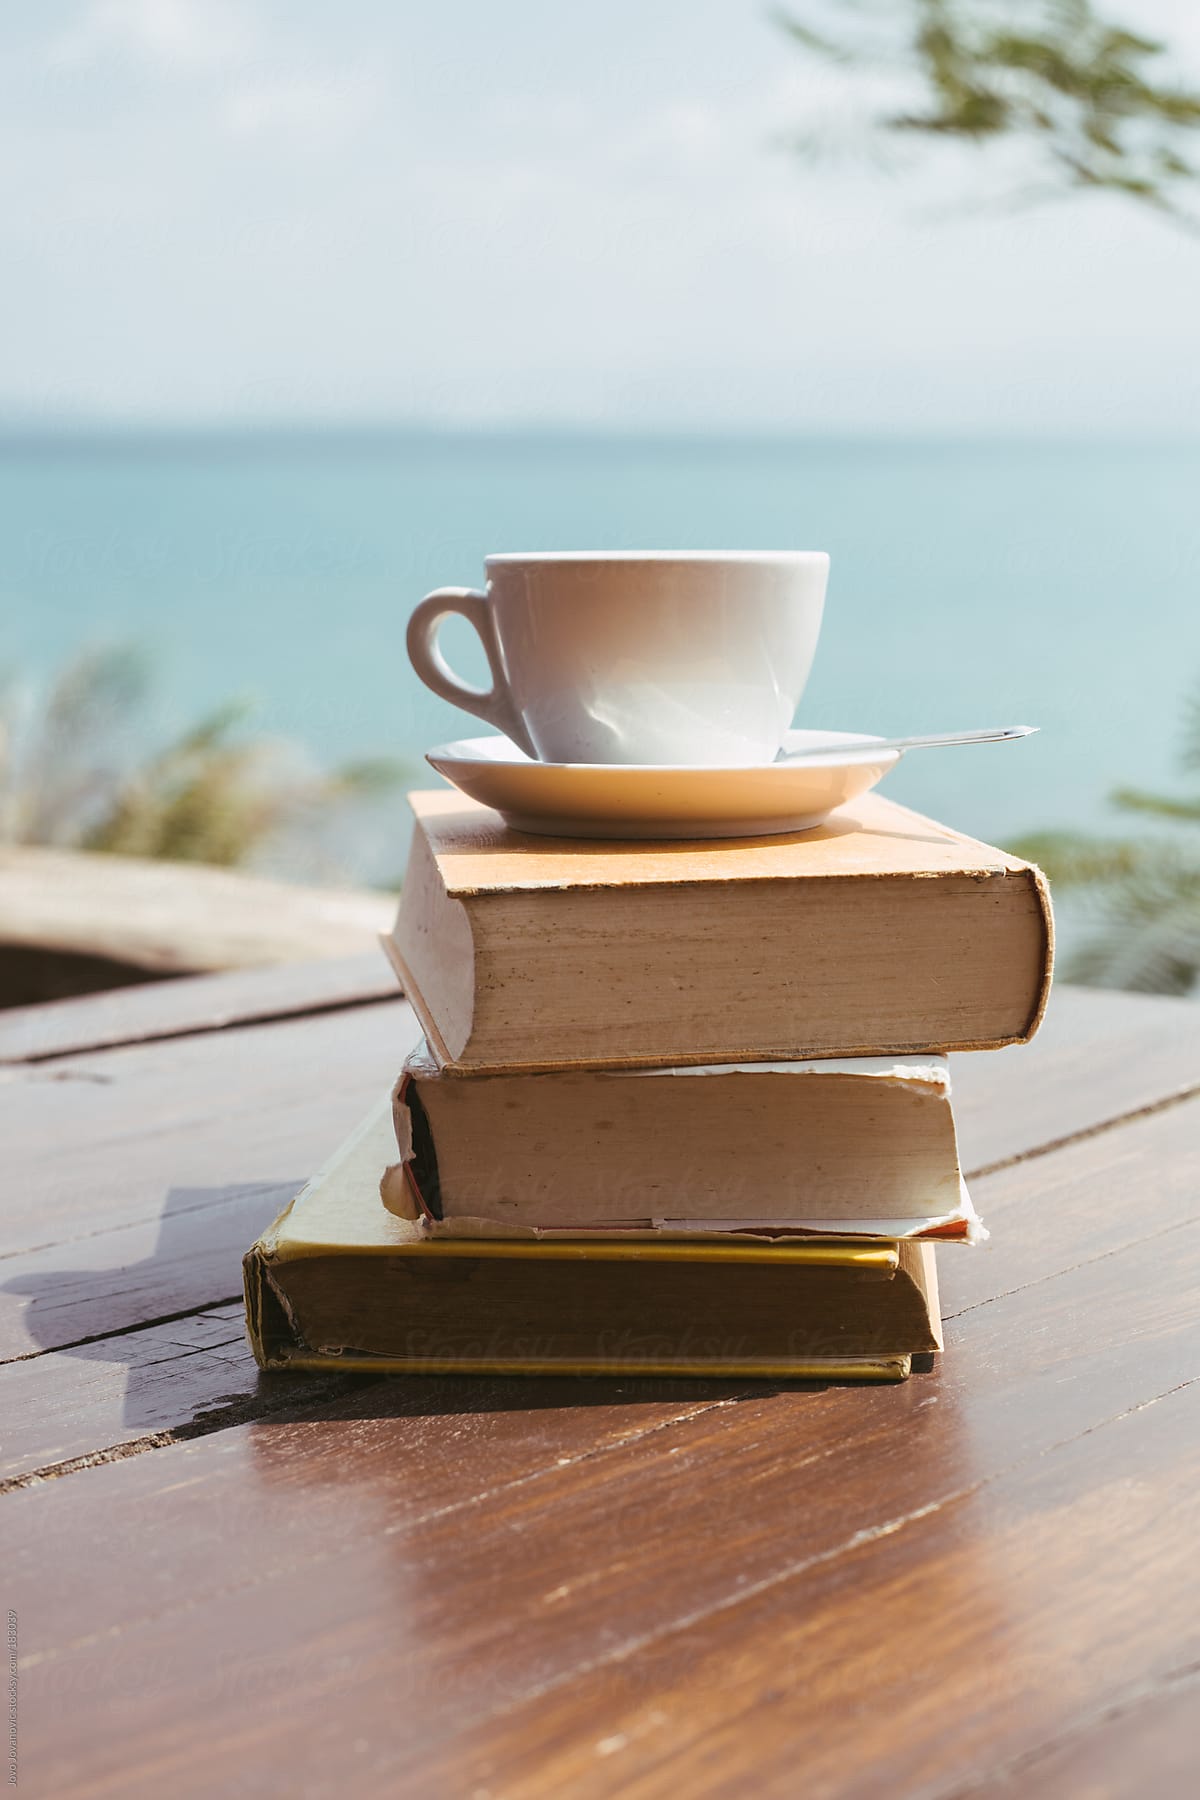 Summertime happiness - books and coffee with a ocean view